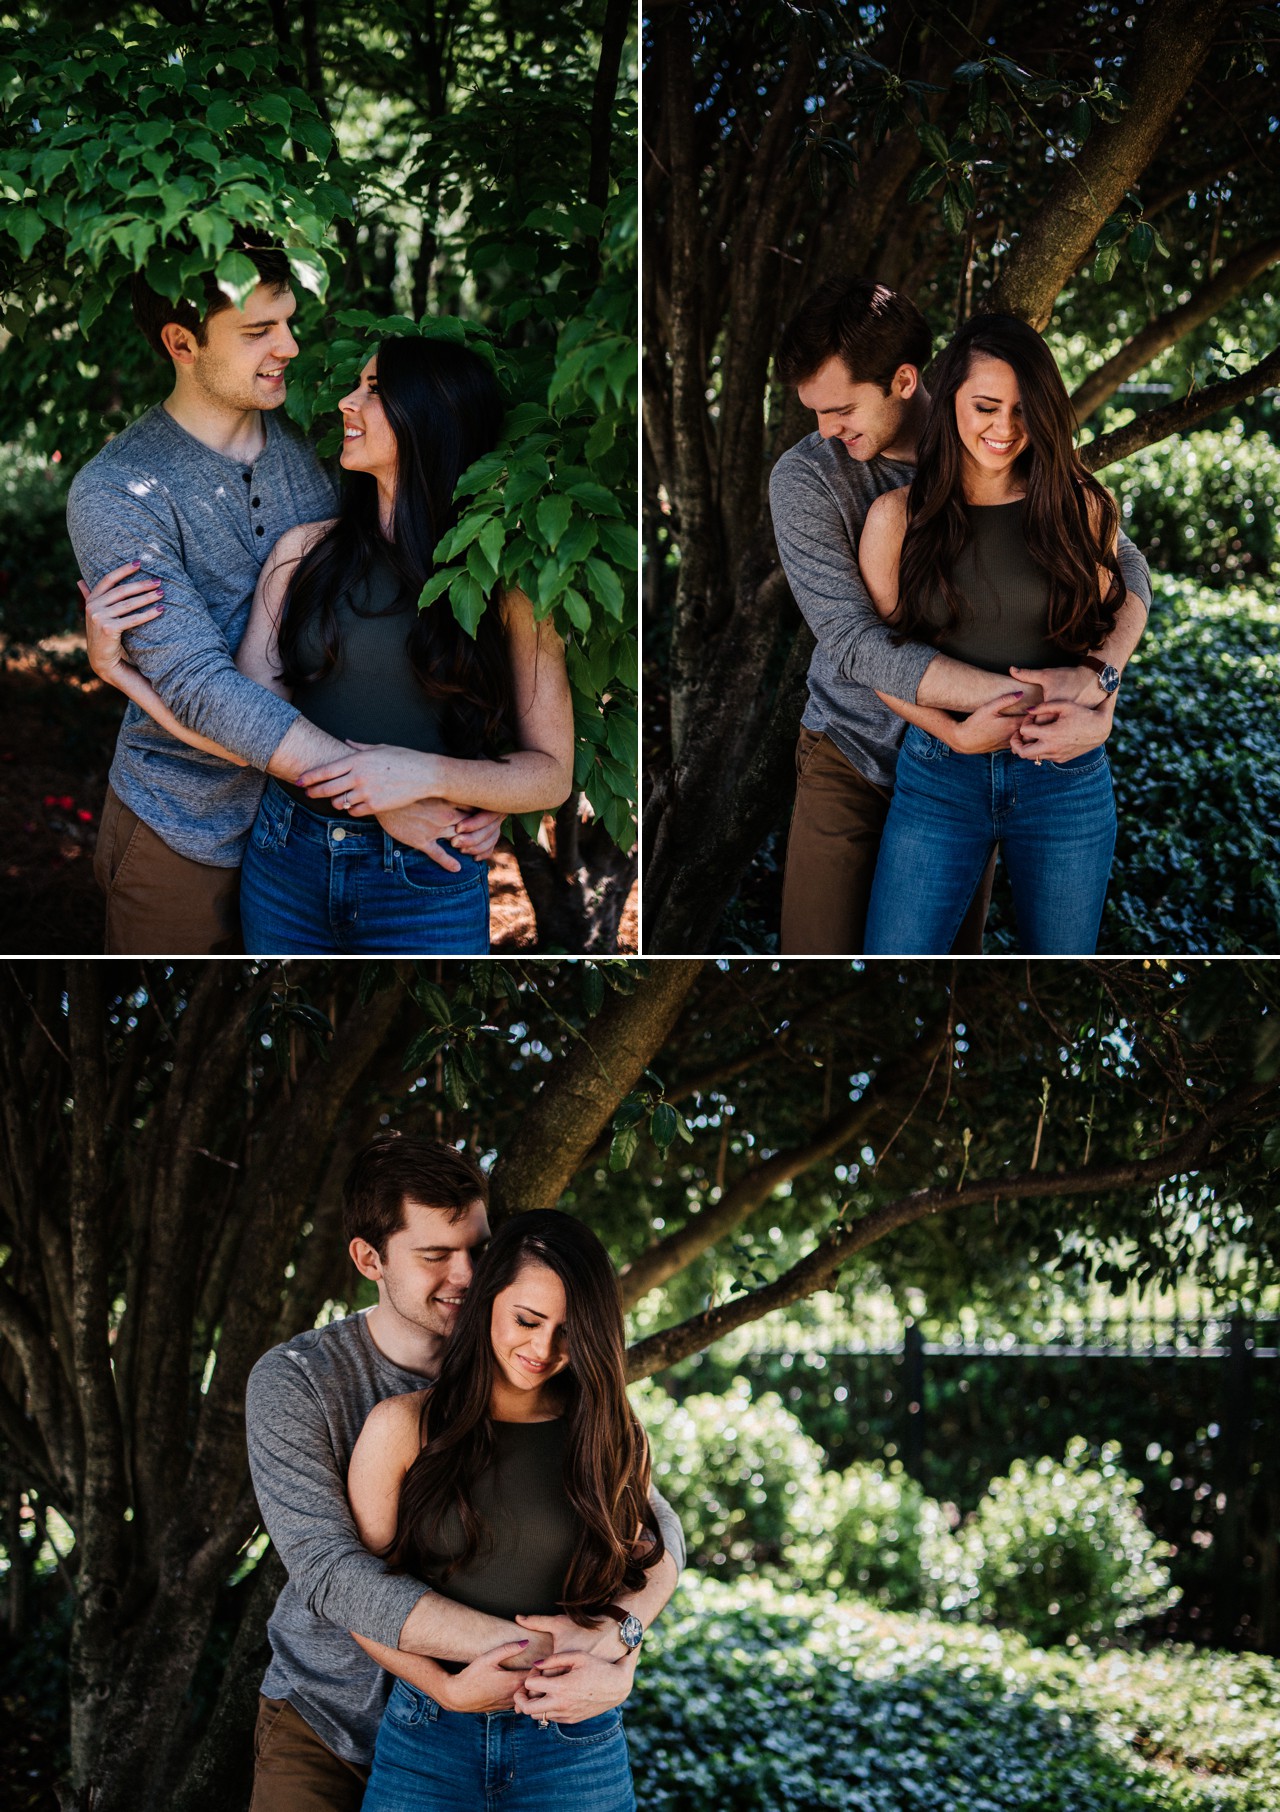 Charlotte Engagement Photographer, North Carolina Engagements, Engagement Sessions at McGill Rose Garden, Uptown Engagement Session, Rebecca Stone Photography, Cityscape Engagement Session, Charlotte Engagement Photography